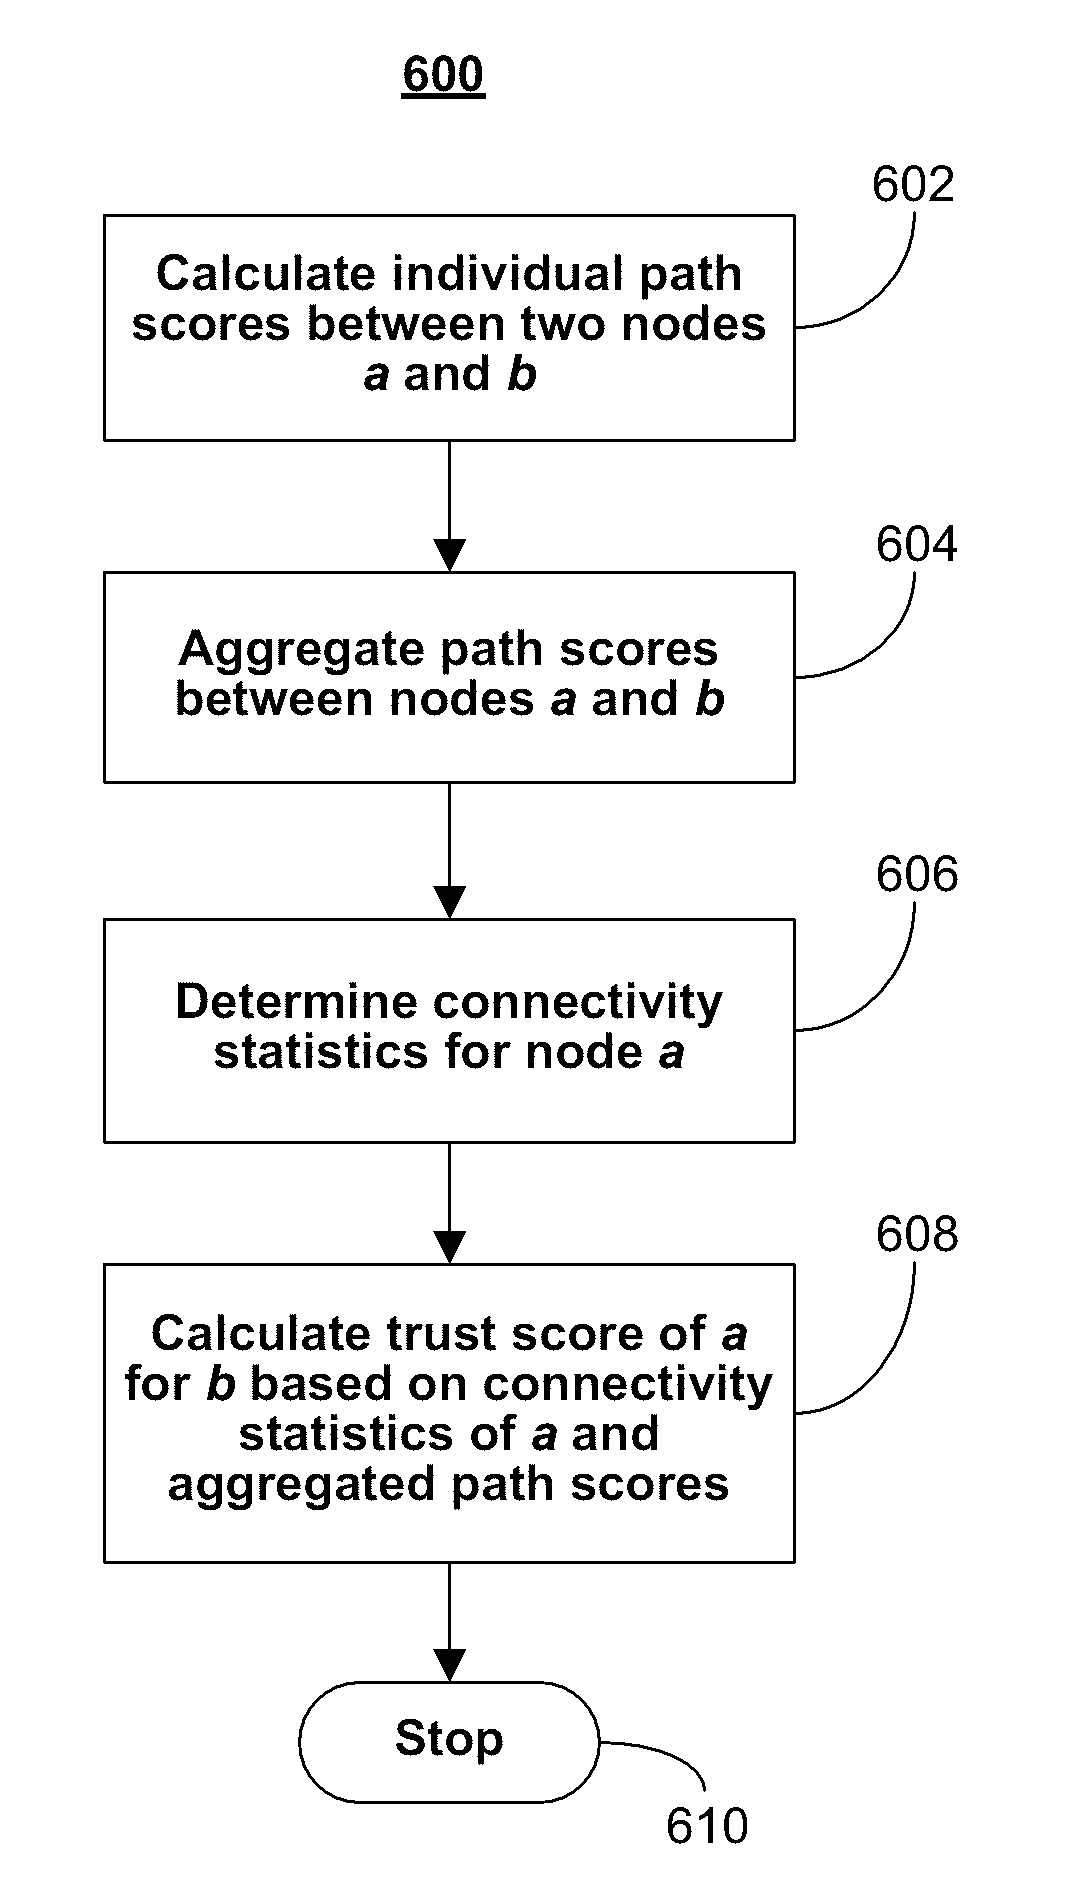 Calculating trust scores based on social graph statistics